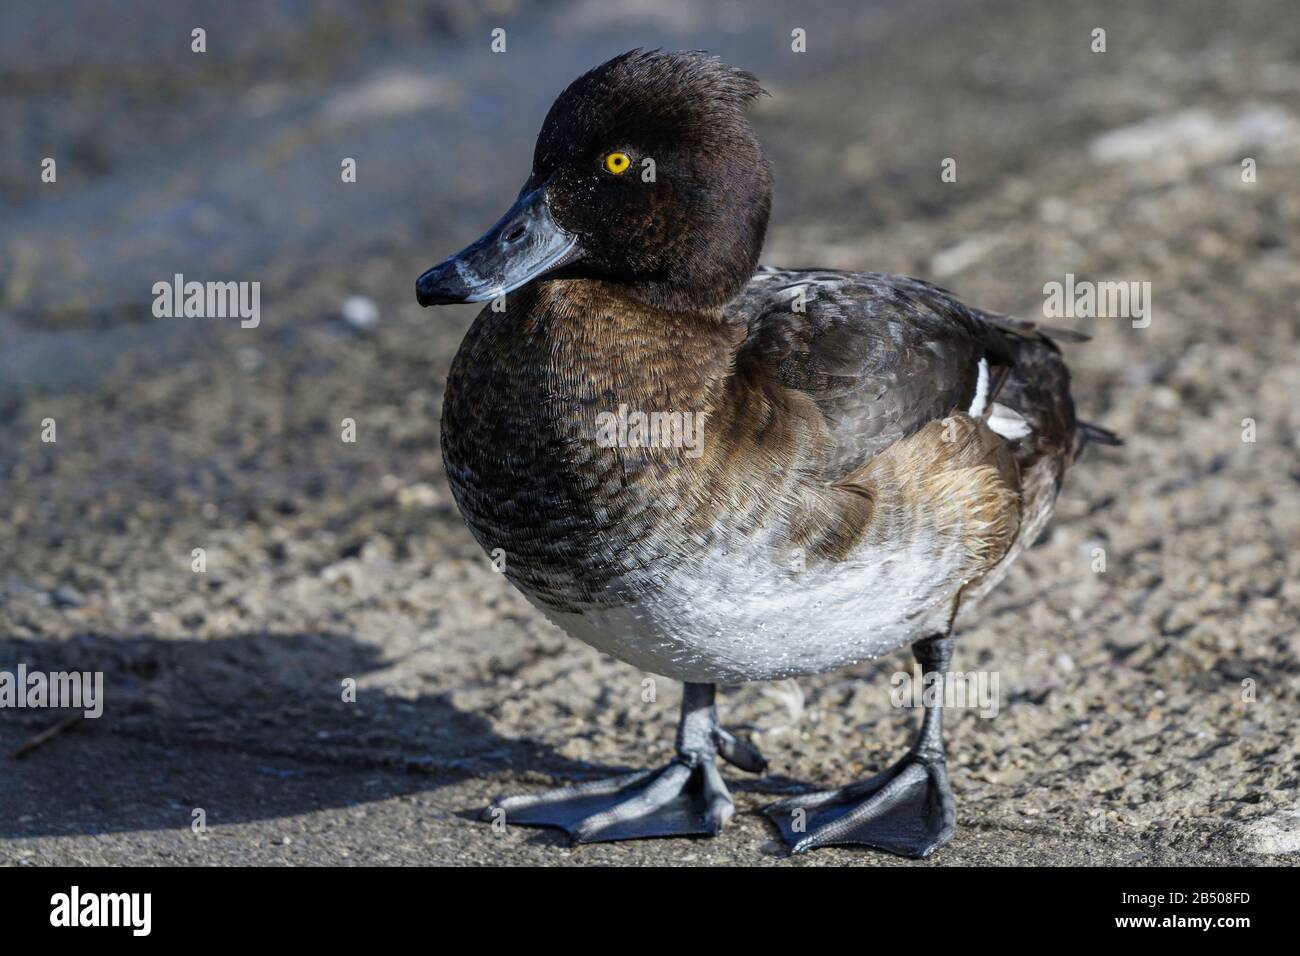 Female Tufted Duck, standing Stock Photo